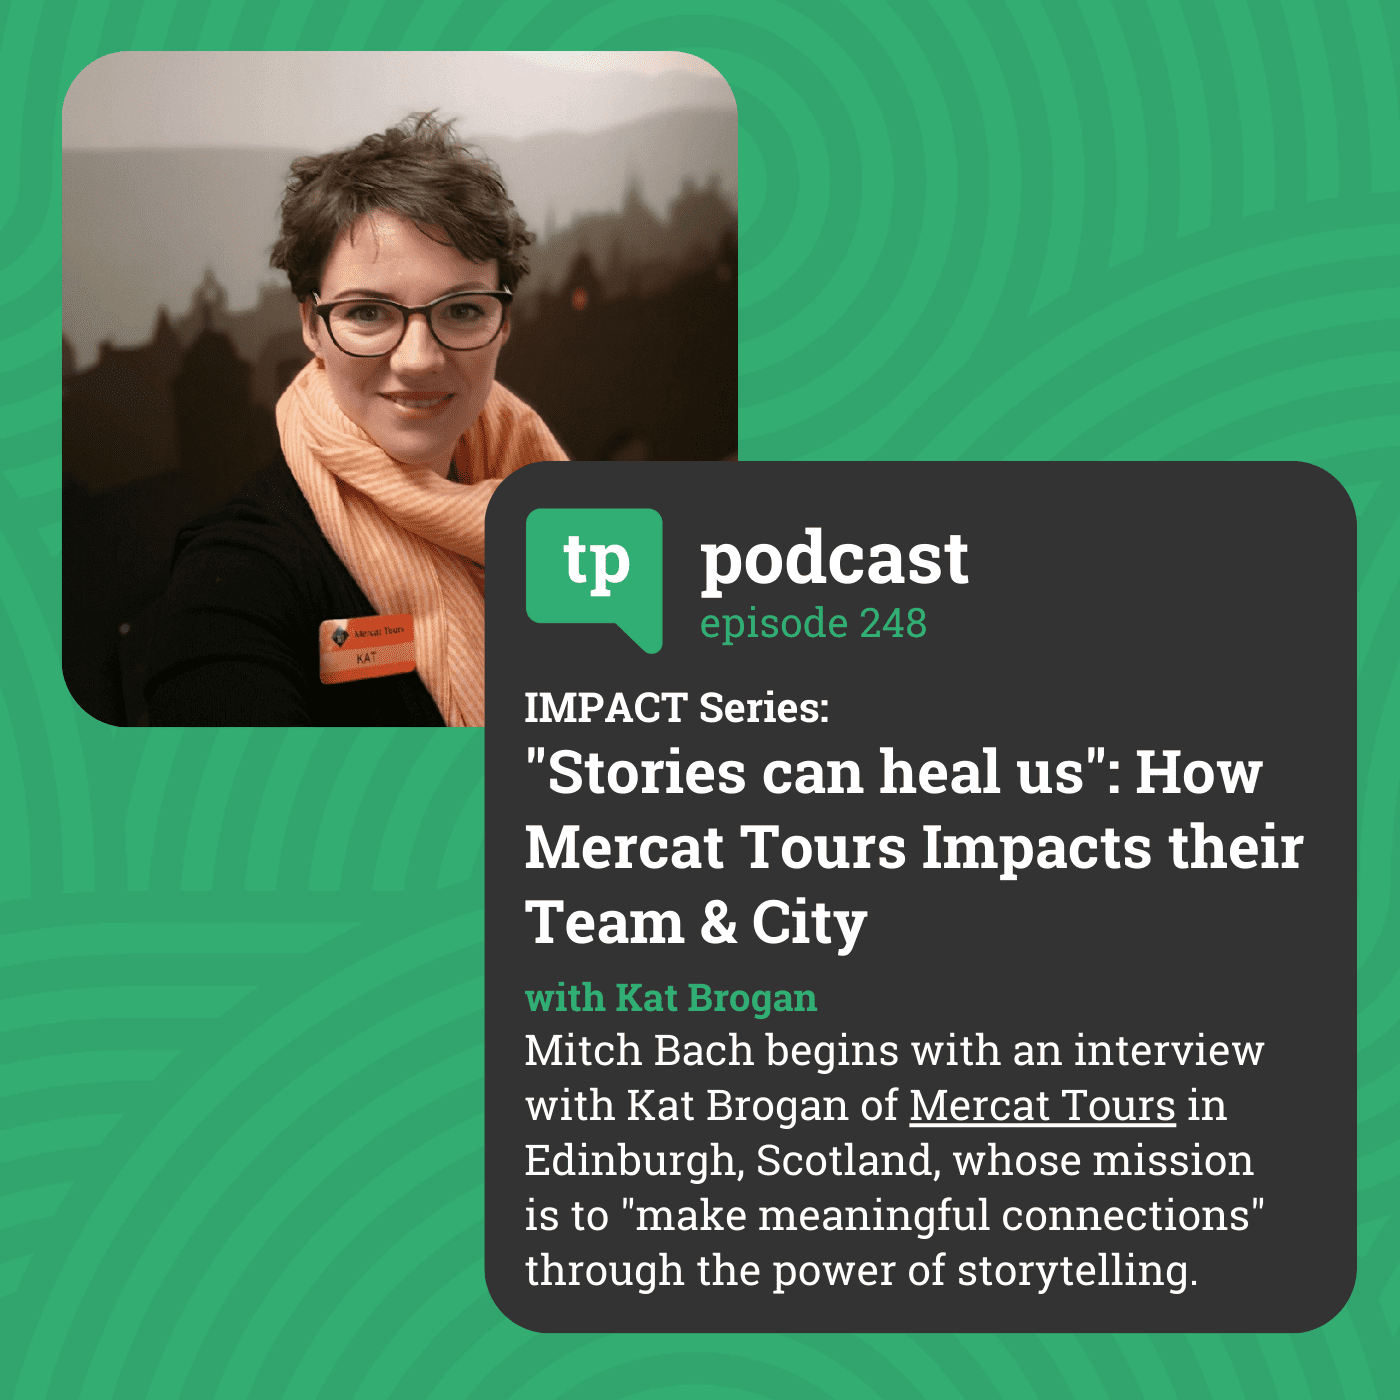 IMPACT Series: "Stories can heal us": How Mercat Tours Impacts their Team & City